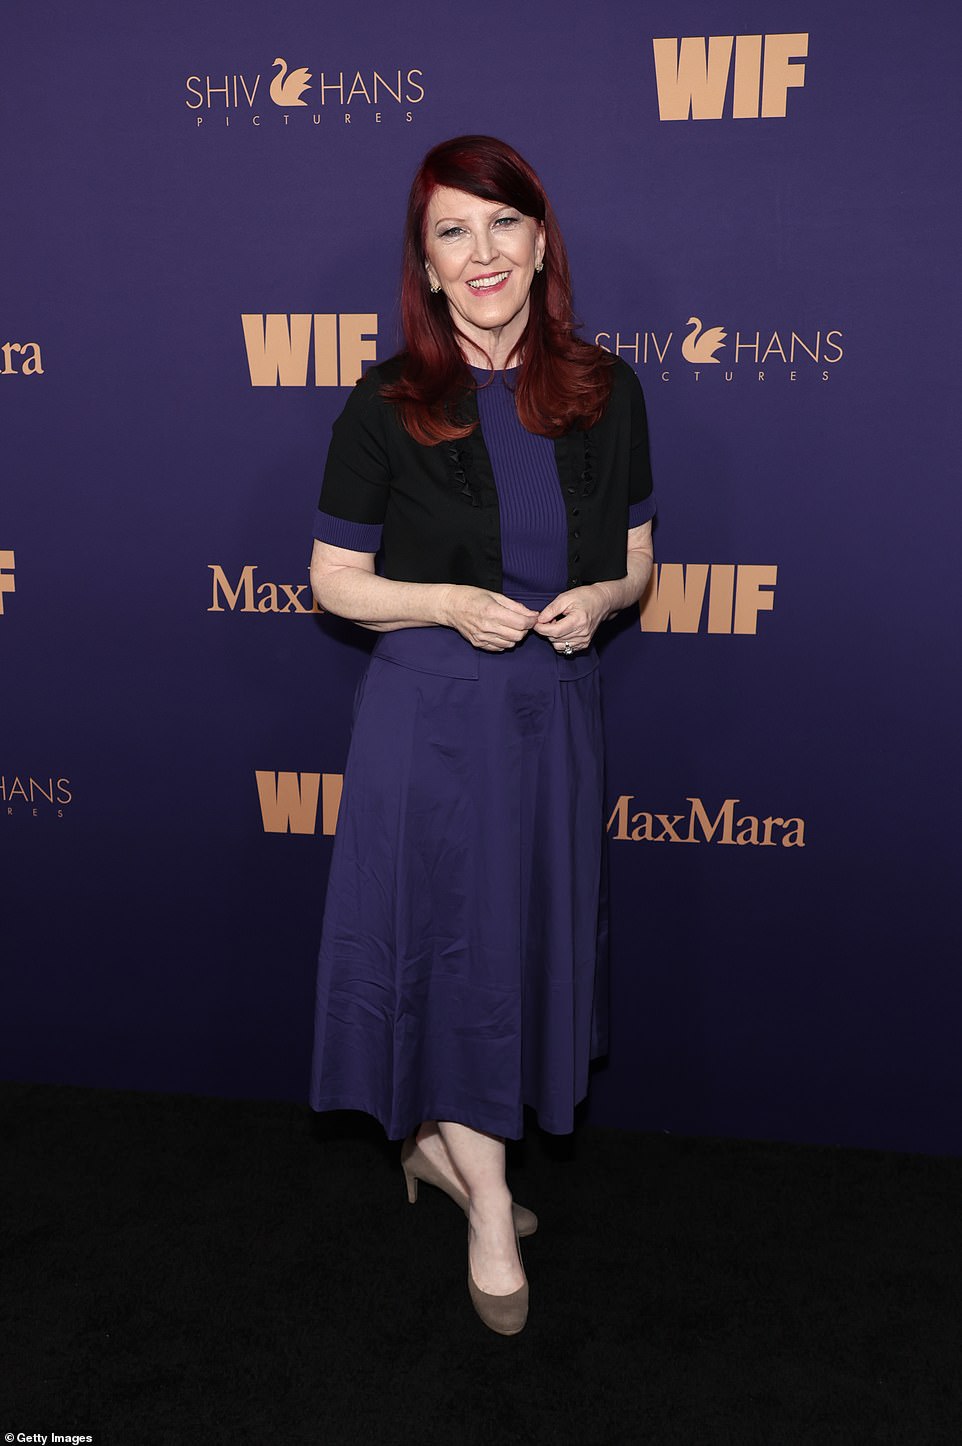 Kate Flannery put on an elegant display for the party and modeled a deep purple dress layered with a matching black, short-sleeved blazer. The Office star sported brown suede pumps and rocked a hot pink lip